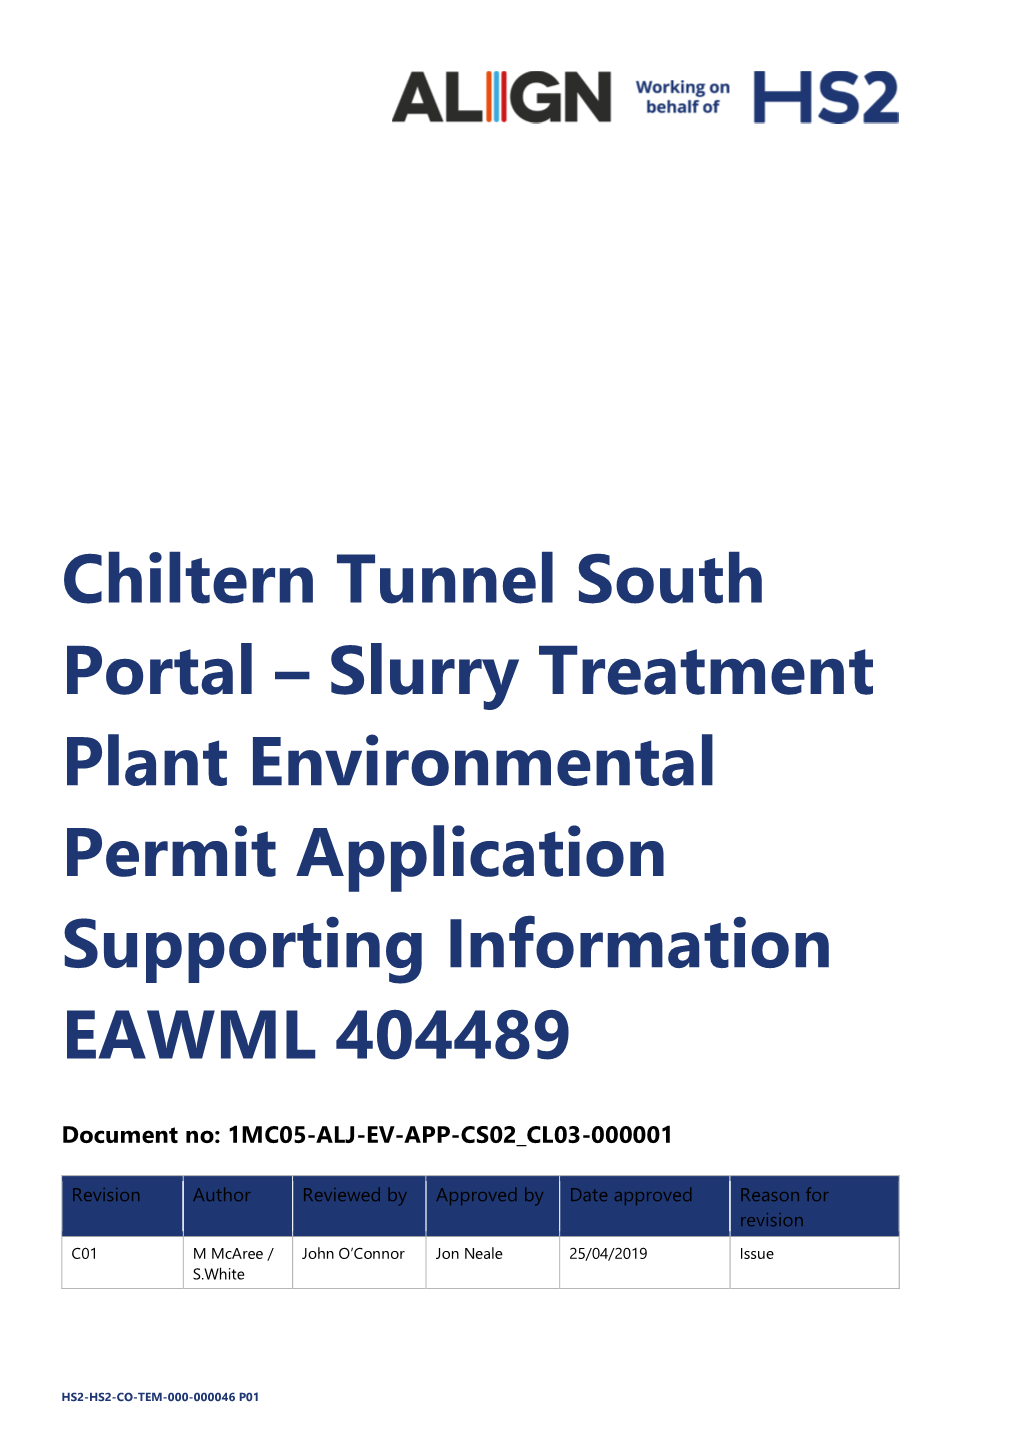 Chiltern Tunnel South Portal – Slurry Treatment Plant Environmental Permit Application Supporting Information EAWML 404489